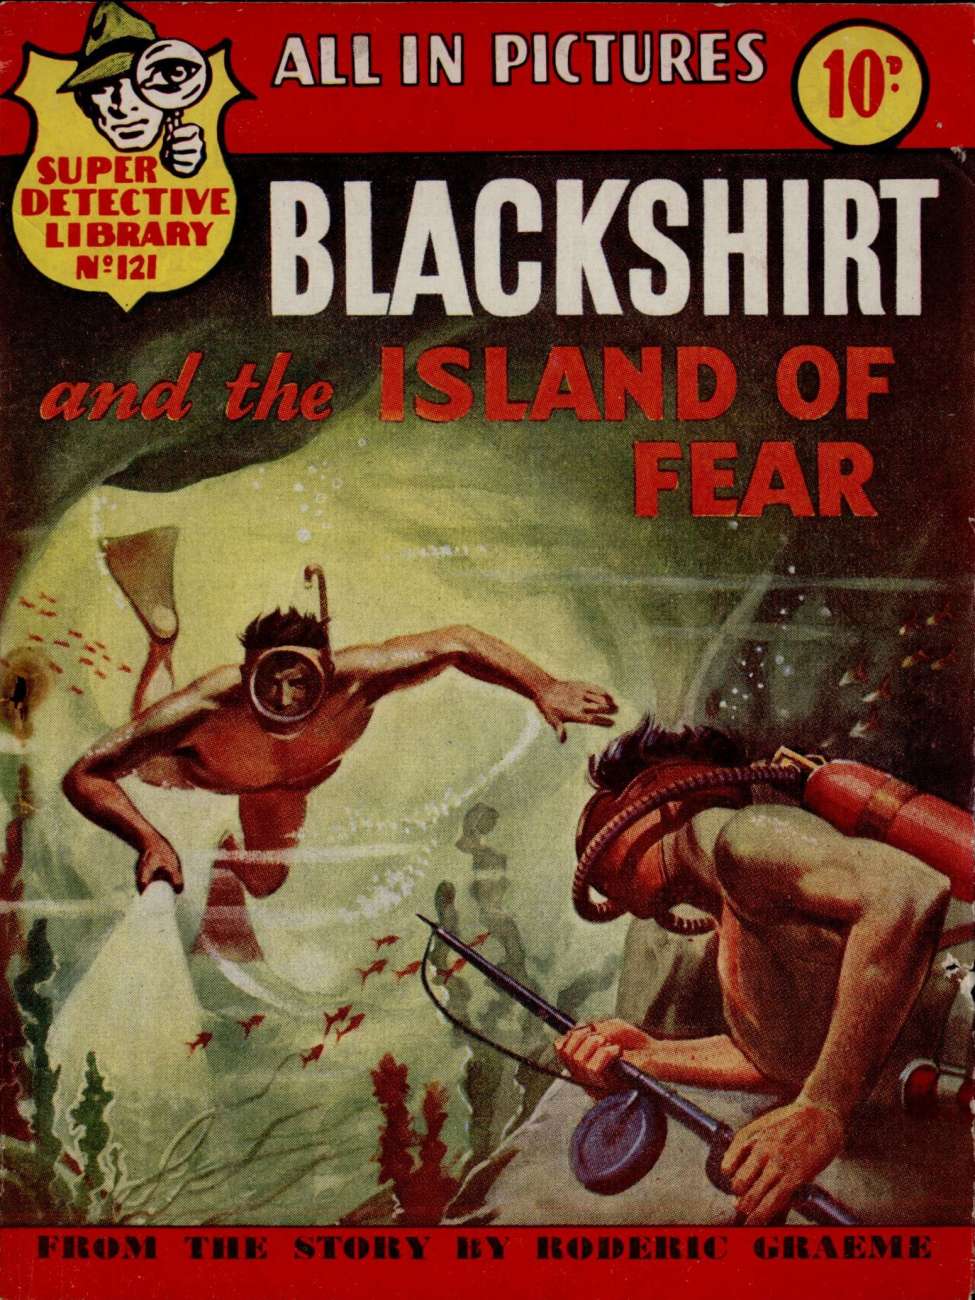 Comic Book Cover For Super Detective Library 121 - The Island of Fear